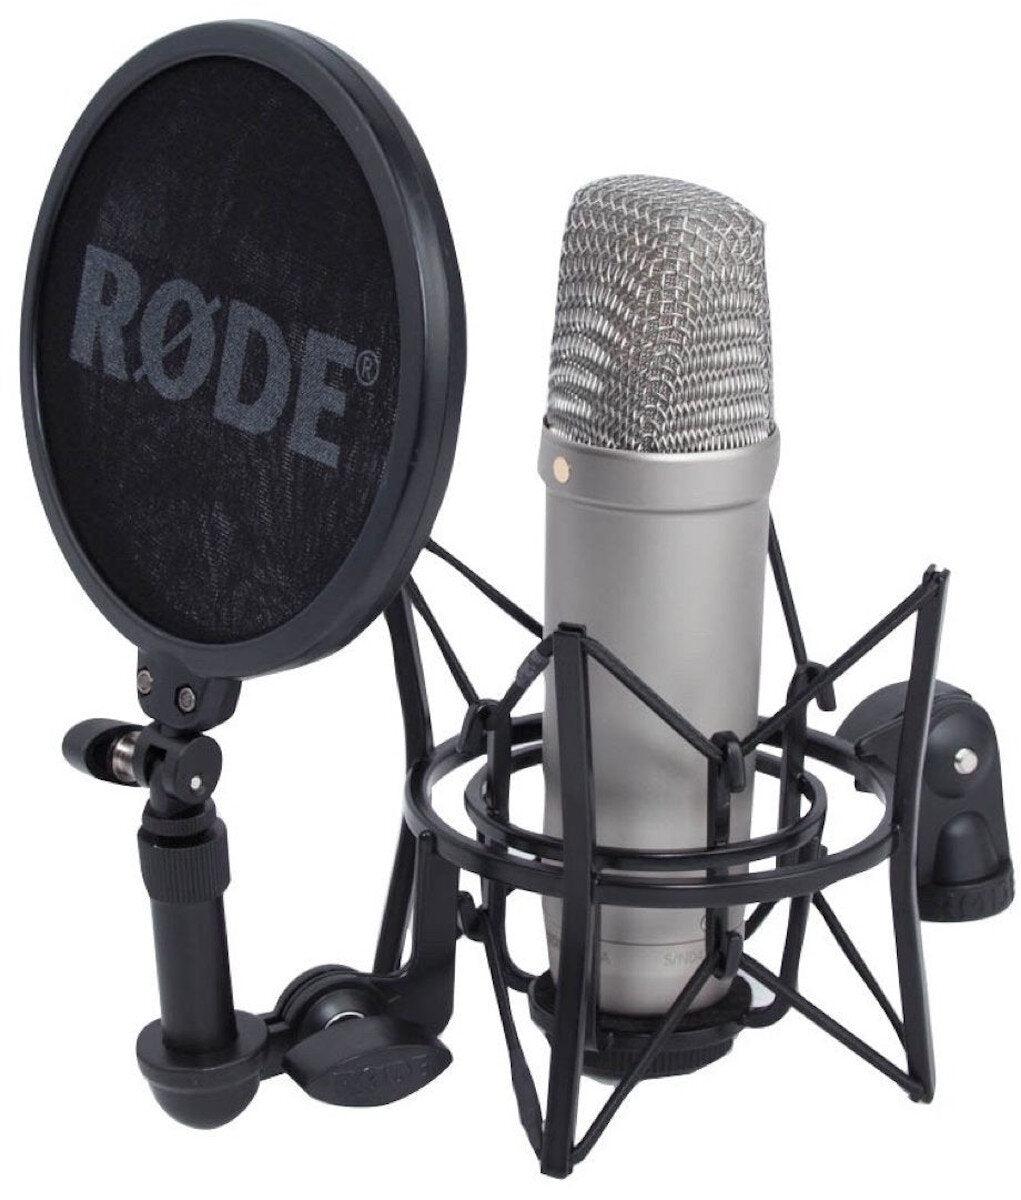 Rode NT1 KIT Complete Recording Microphone Kit with XLR Cable and Stand